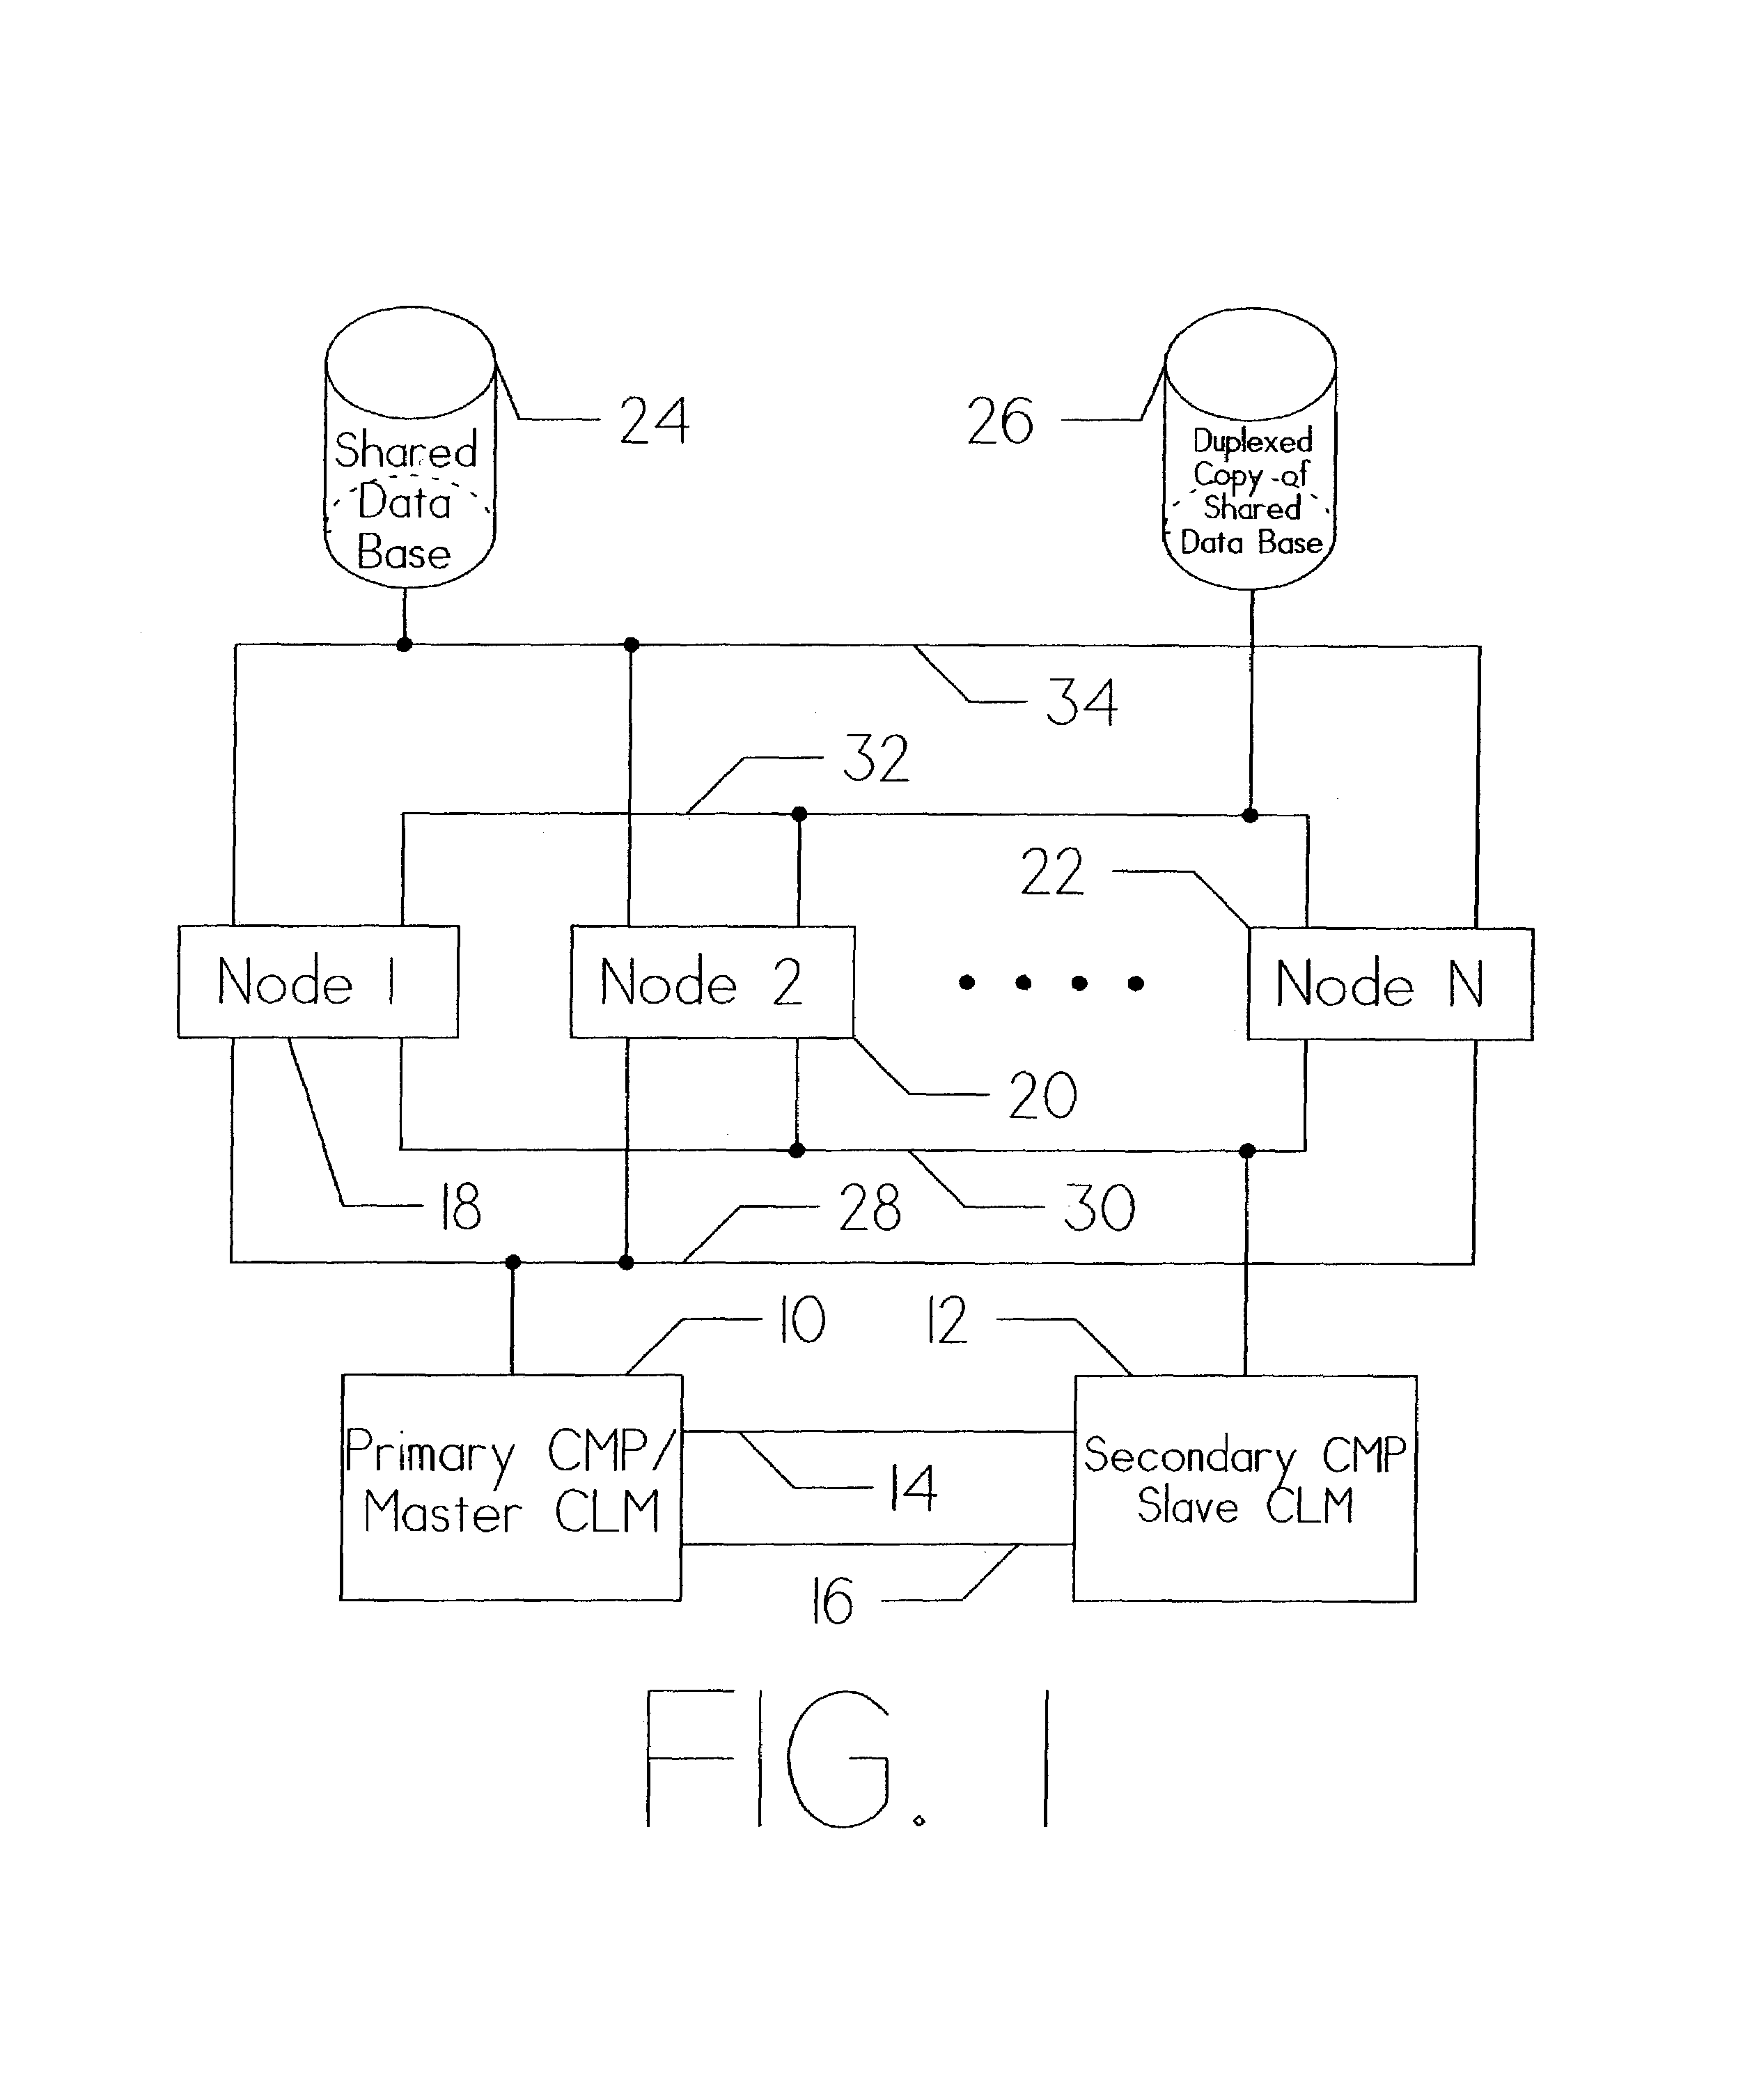 Method for distributing the processing among multiple synchronization paths in a computer system utilizing separate servers for redundancy